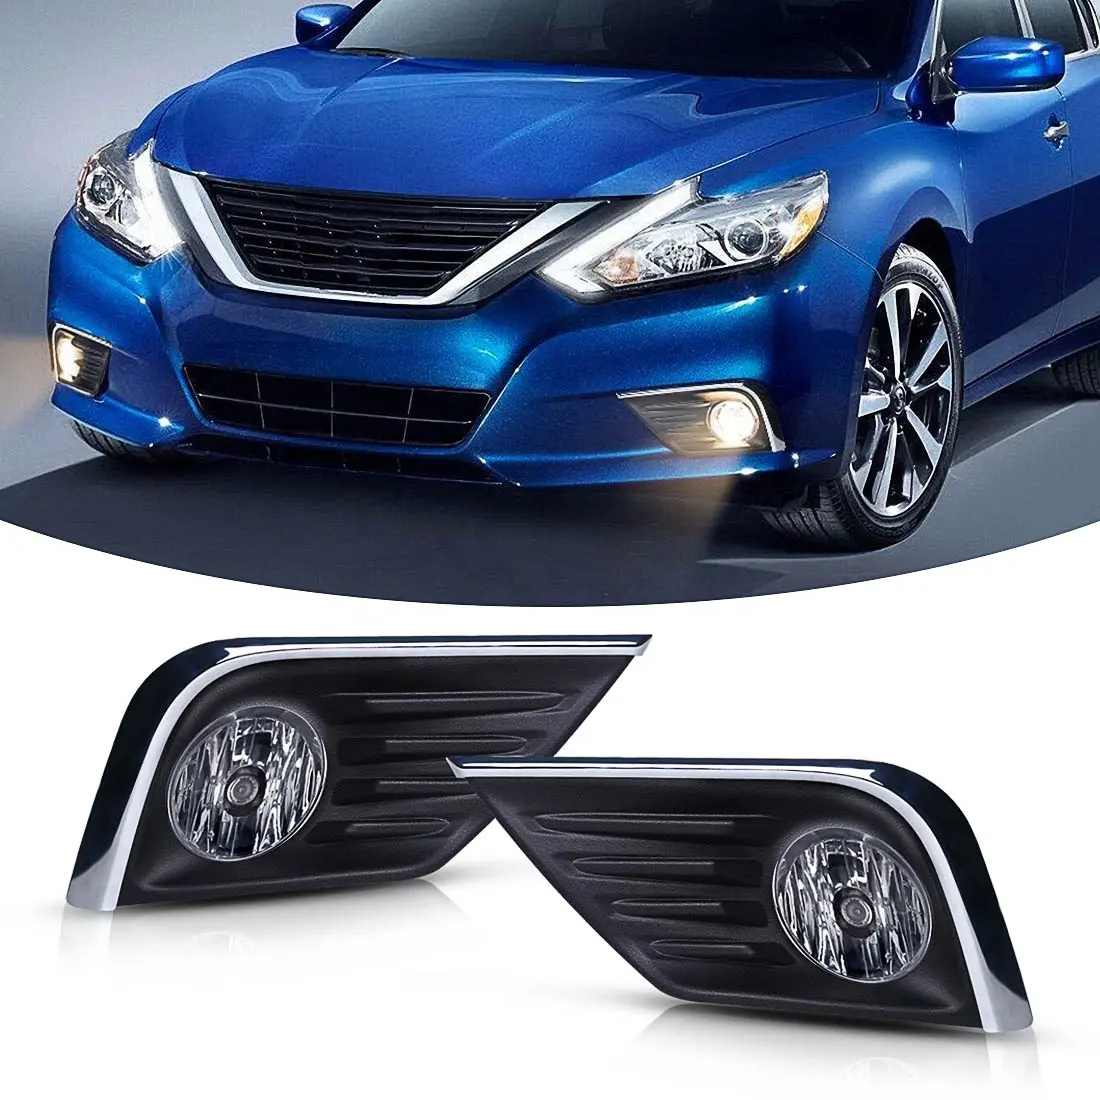 Best Seller New Product Front Bumper Car Auto Driving Lamp Fog Light for Nissan Altima 2016 2017 2018